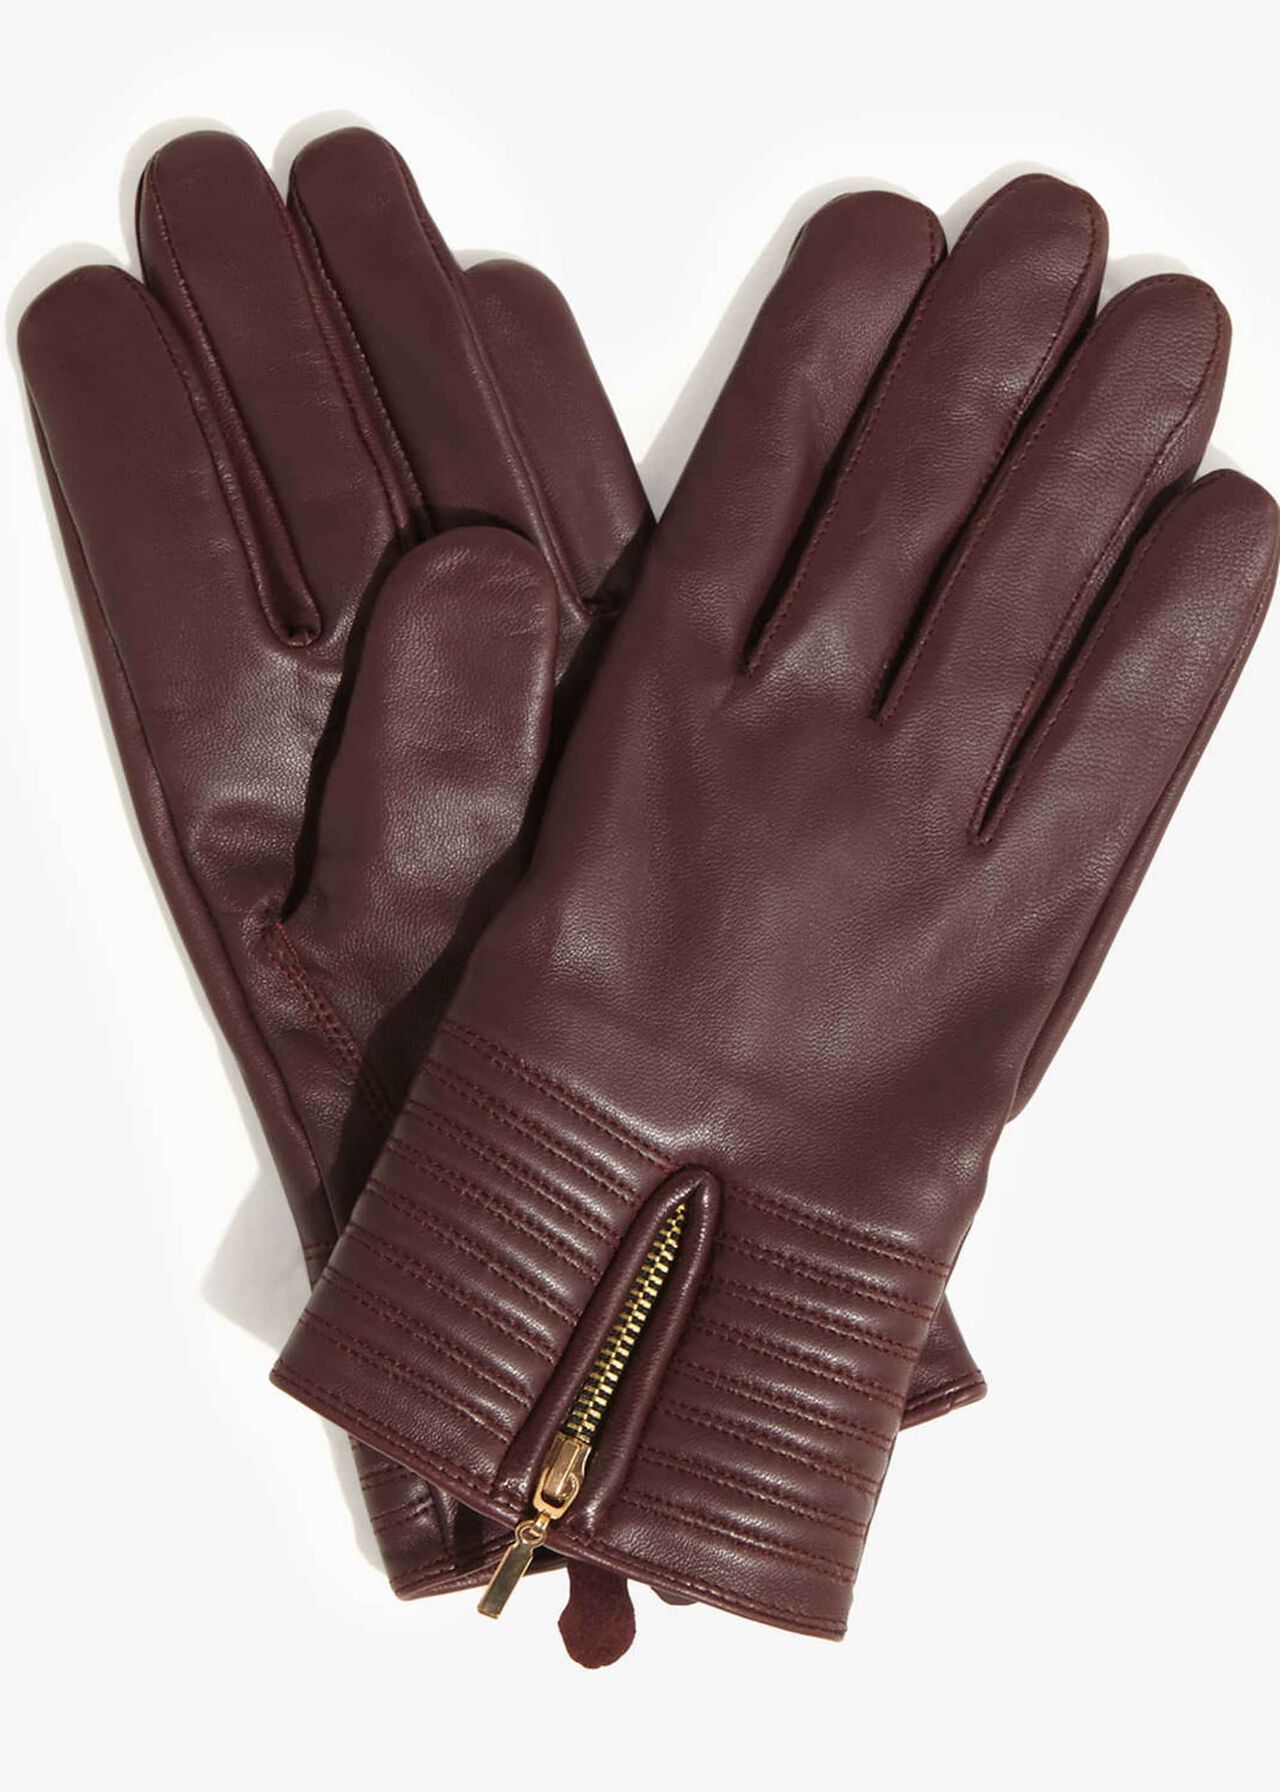 Zip Leather Gloves